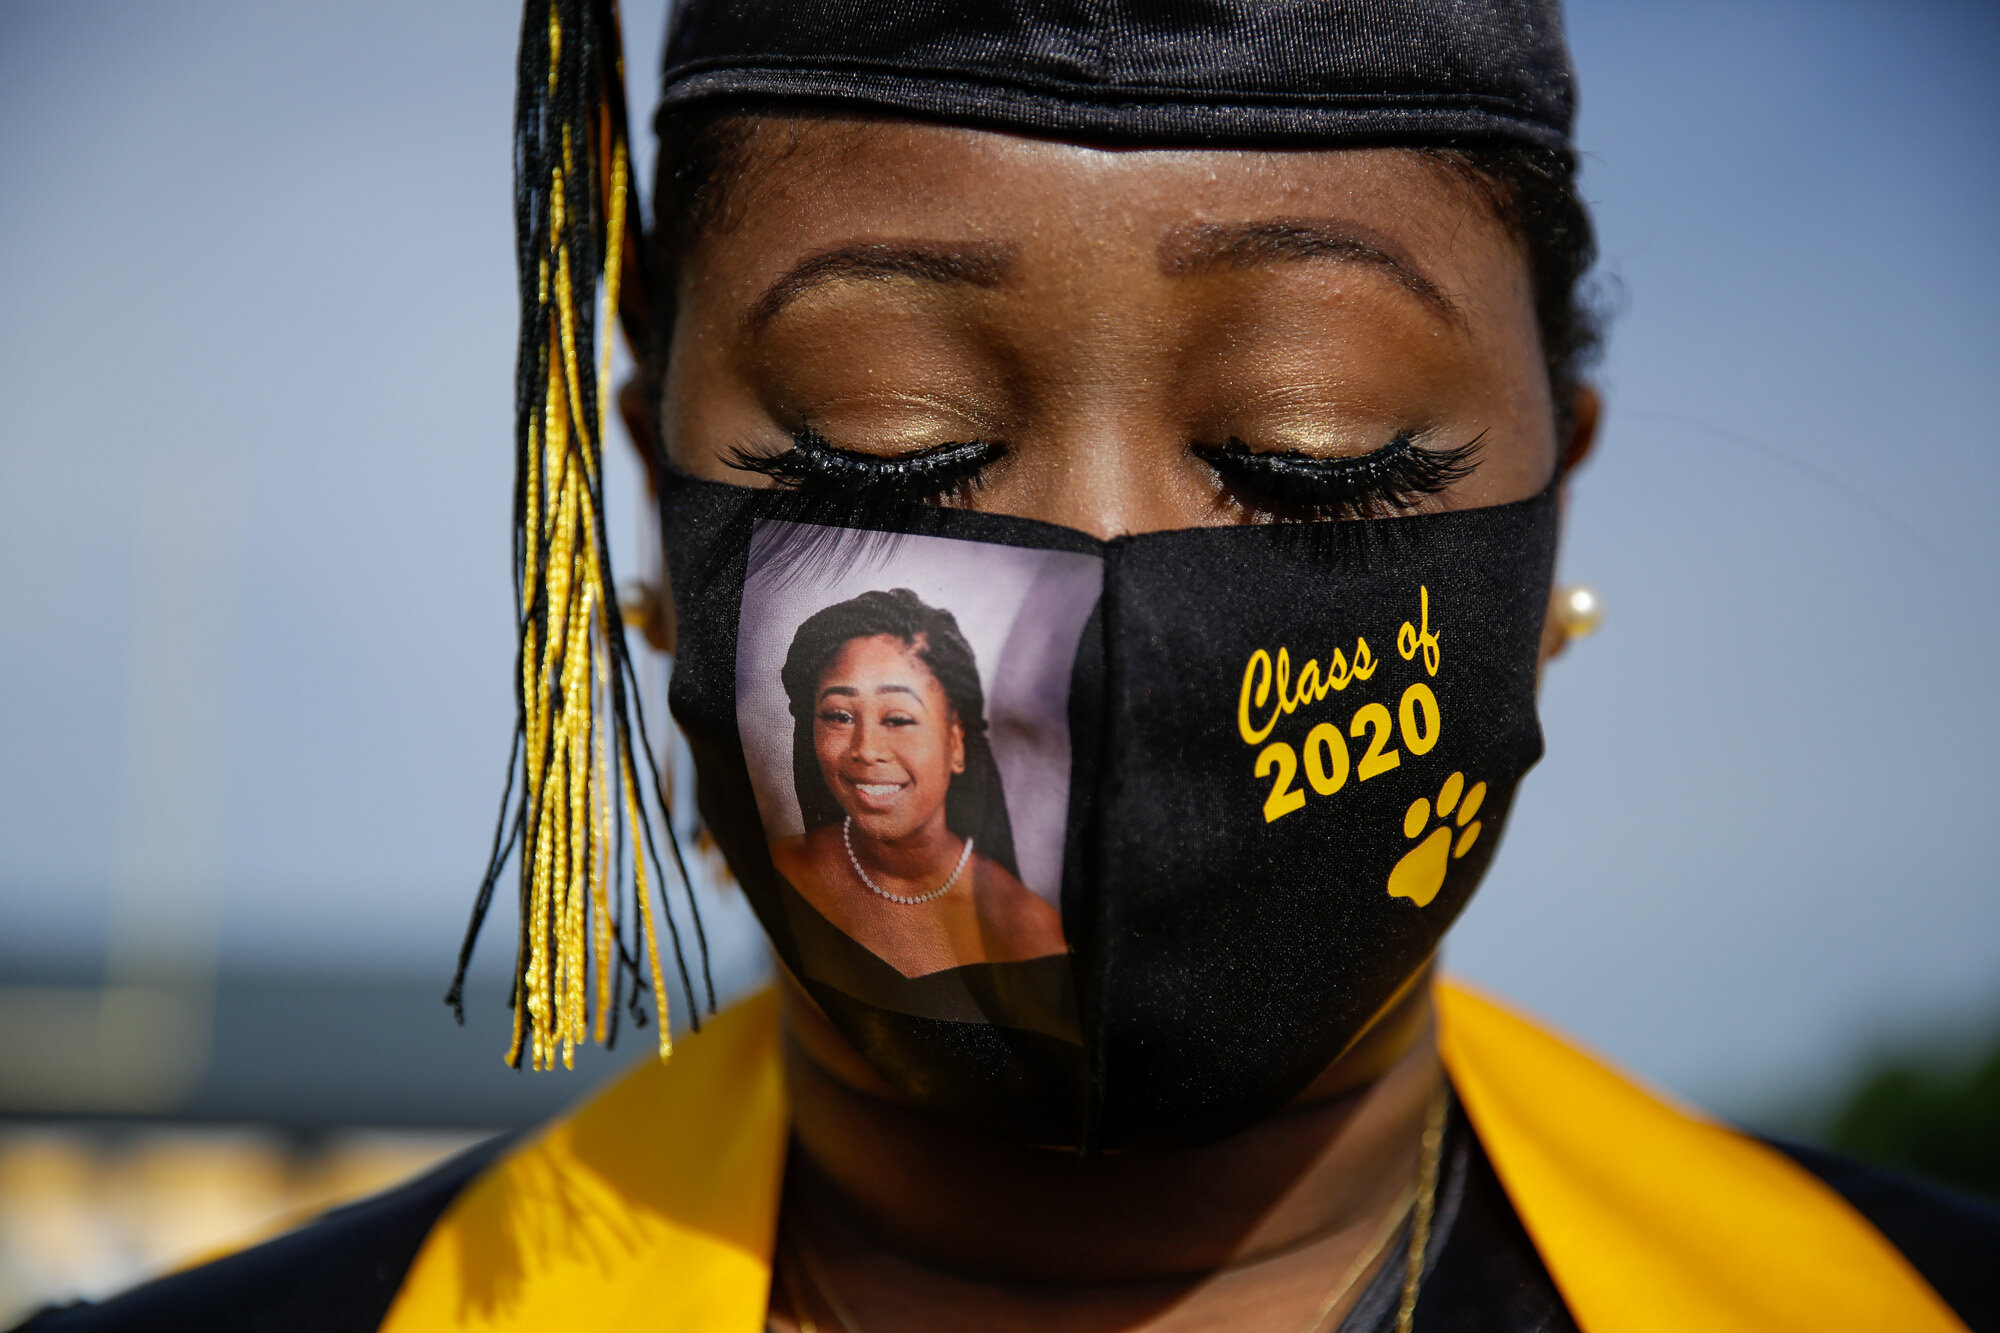  Yasmine Protho, 18, wears a photo of herself and “Class of 2020” on her protective mask amid the COVID-19 virus outbreak as she graduates with only nine other classmates and limited family attending at Chattahoochee County High School in Cusseta, Ga